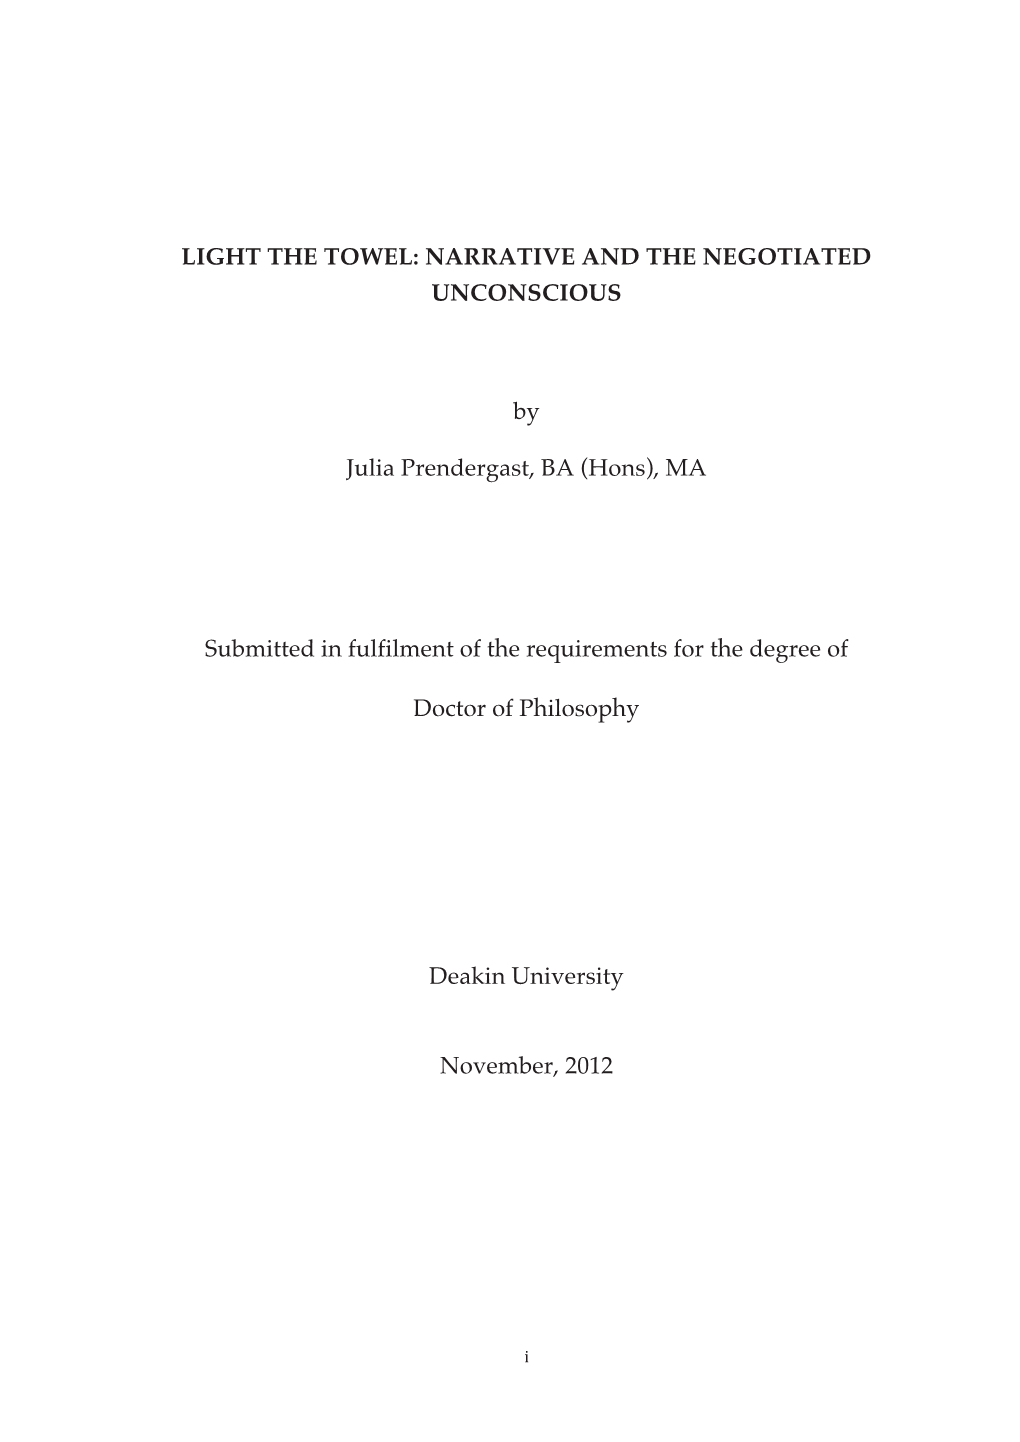 LIGHT the TOWEL: NARRATIVE and the NEGOTIATED UNCONSCIOUS by Julia Prendergast, BA (Hons), MA Submitted in Fulfilment of The